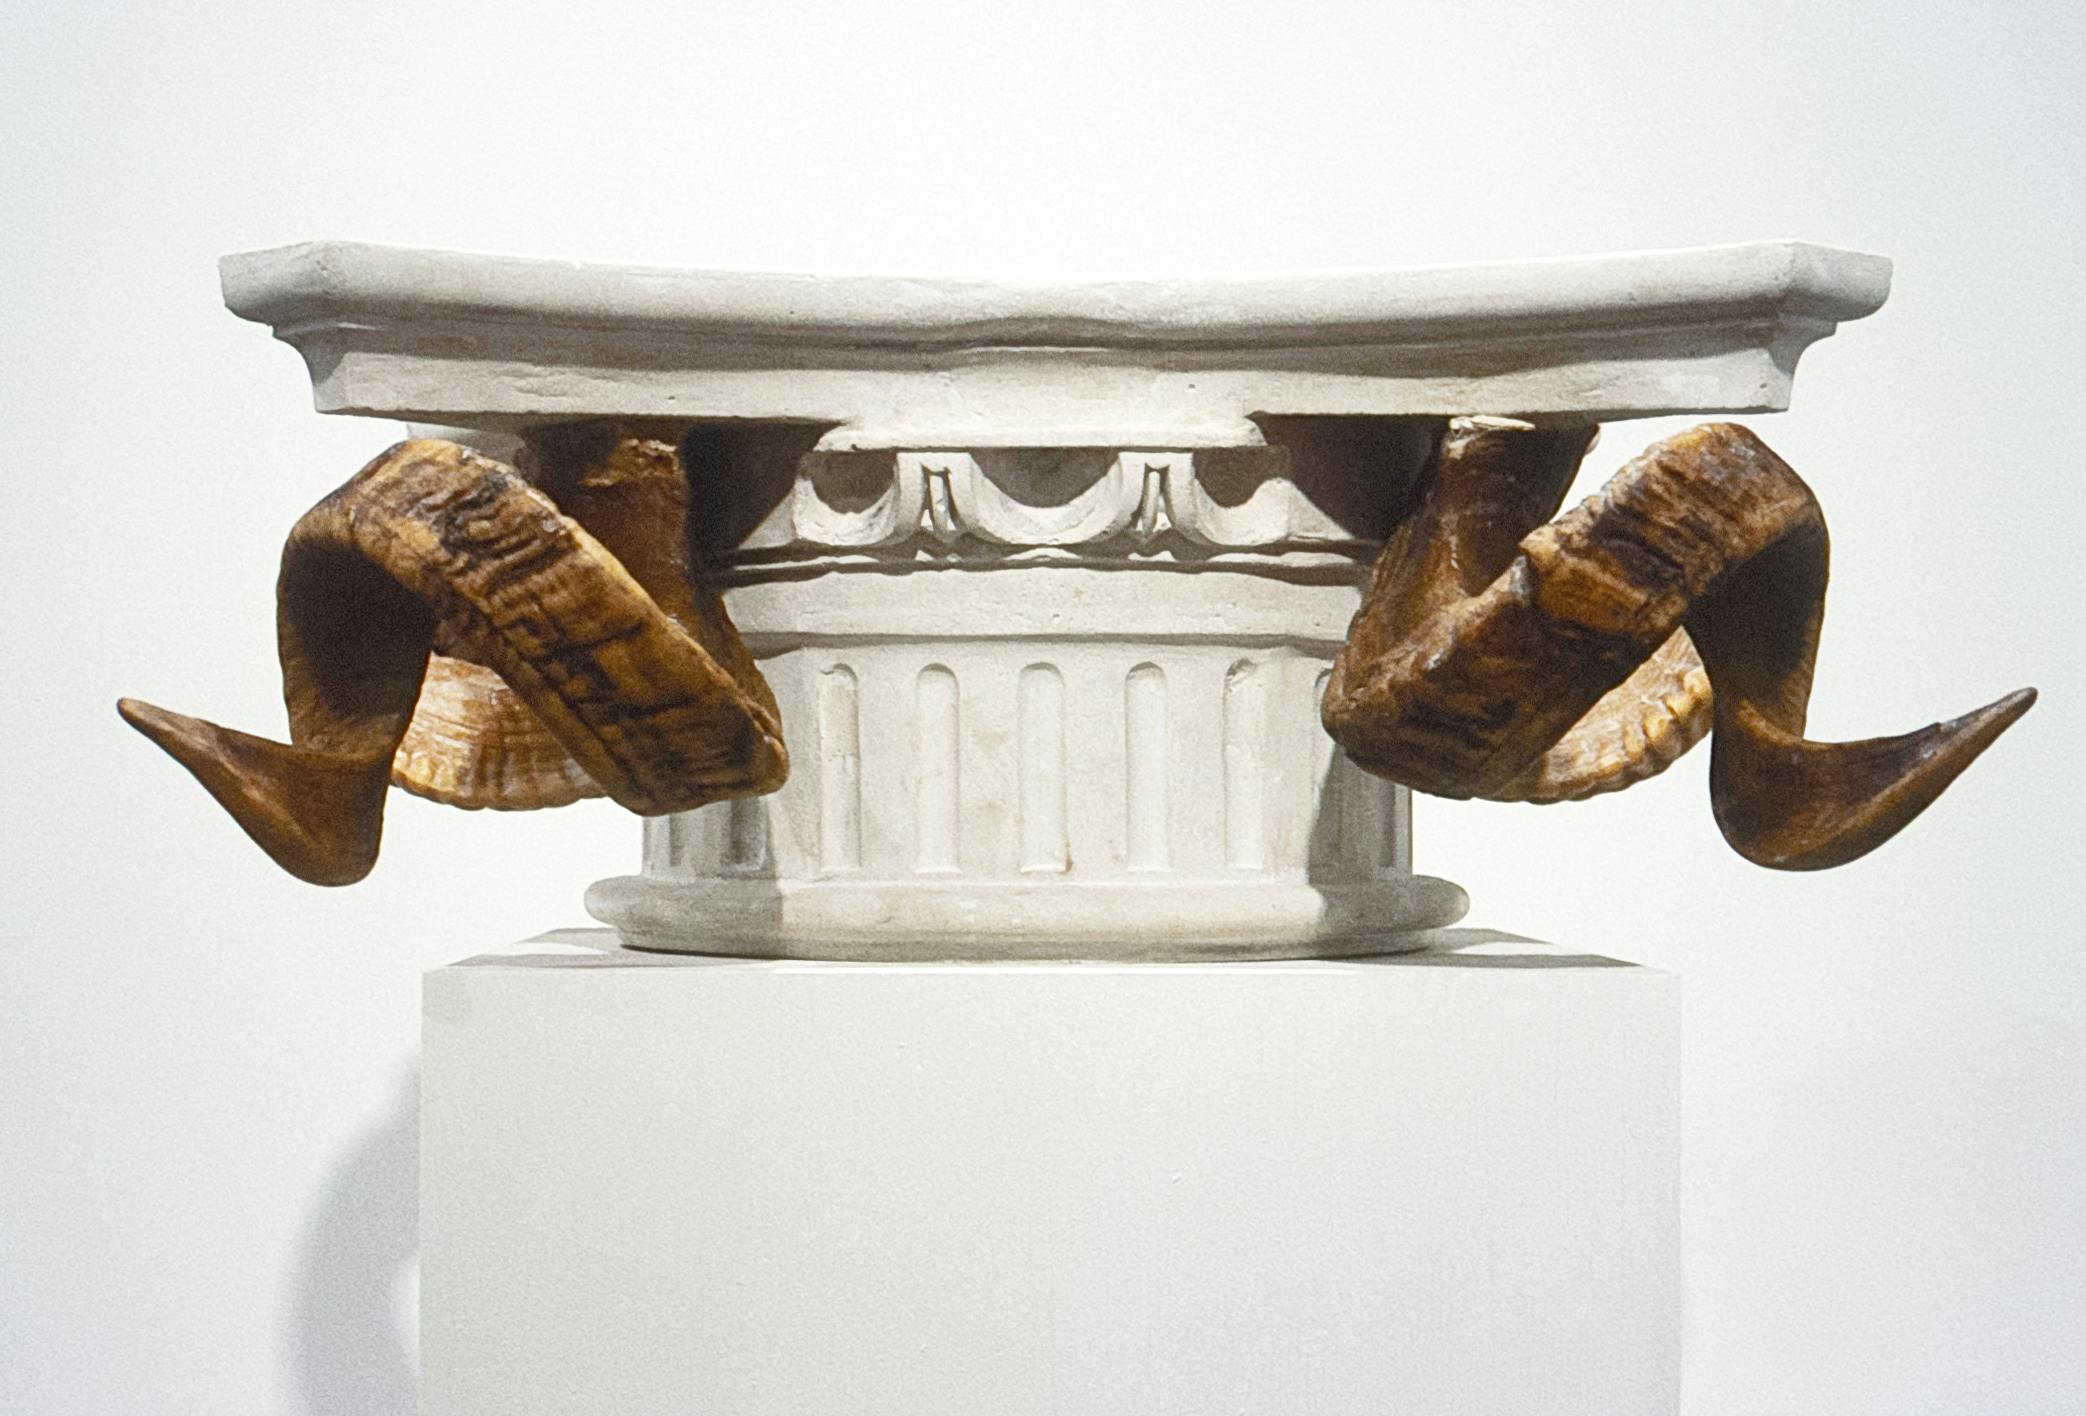 A close up view of the top of a capital column sculpture. Ram horns protrude from the sides of the column. 